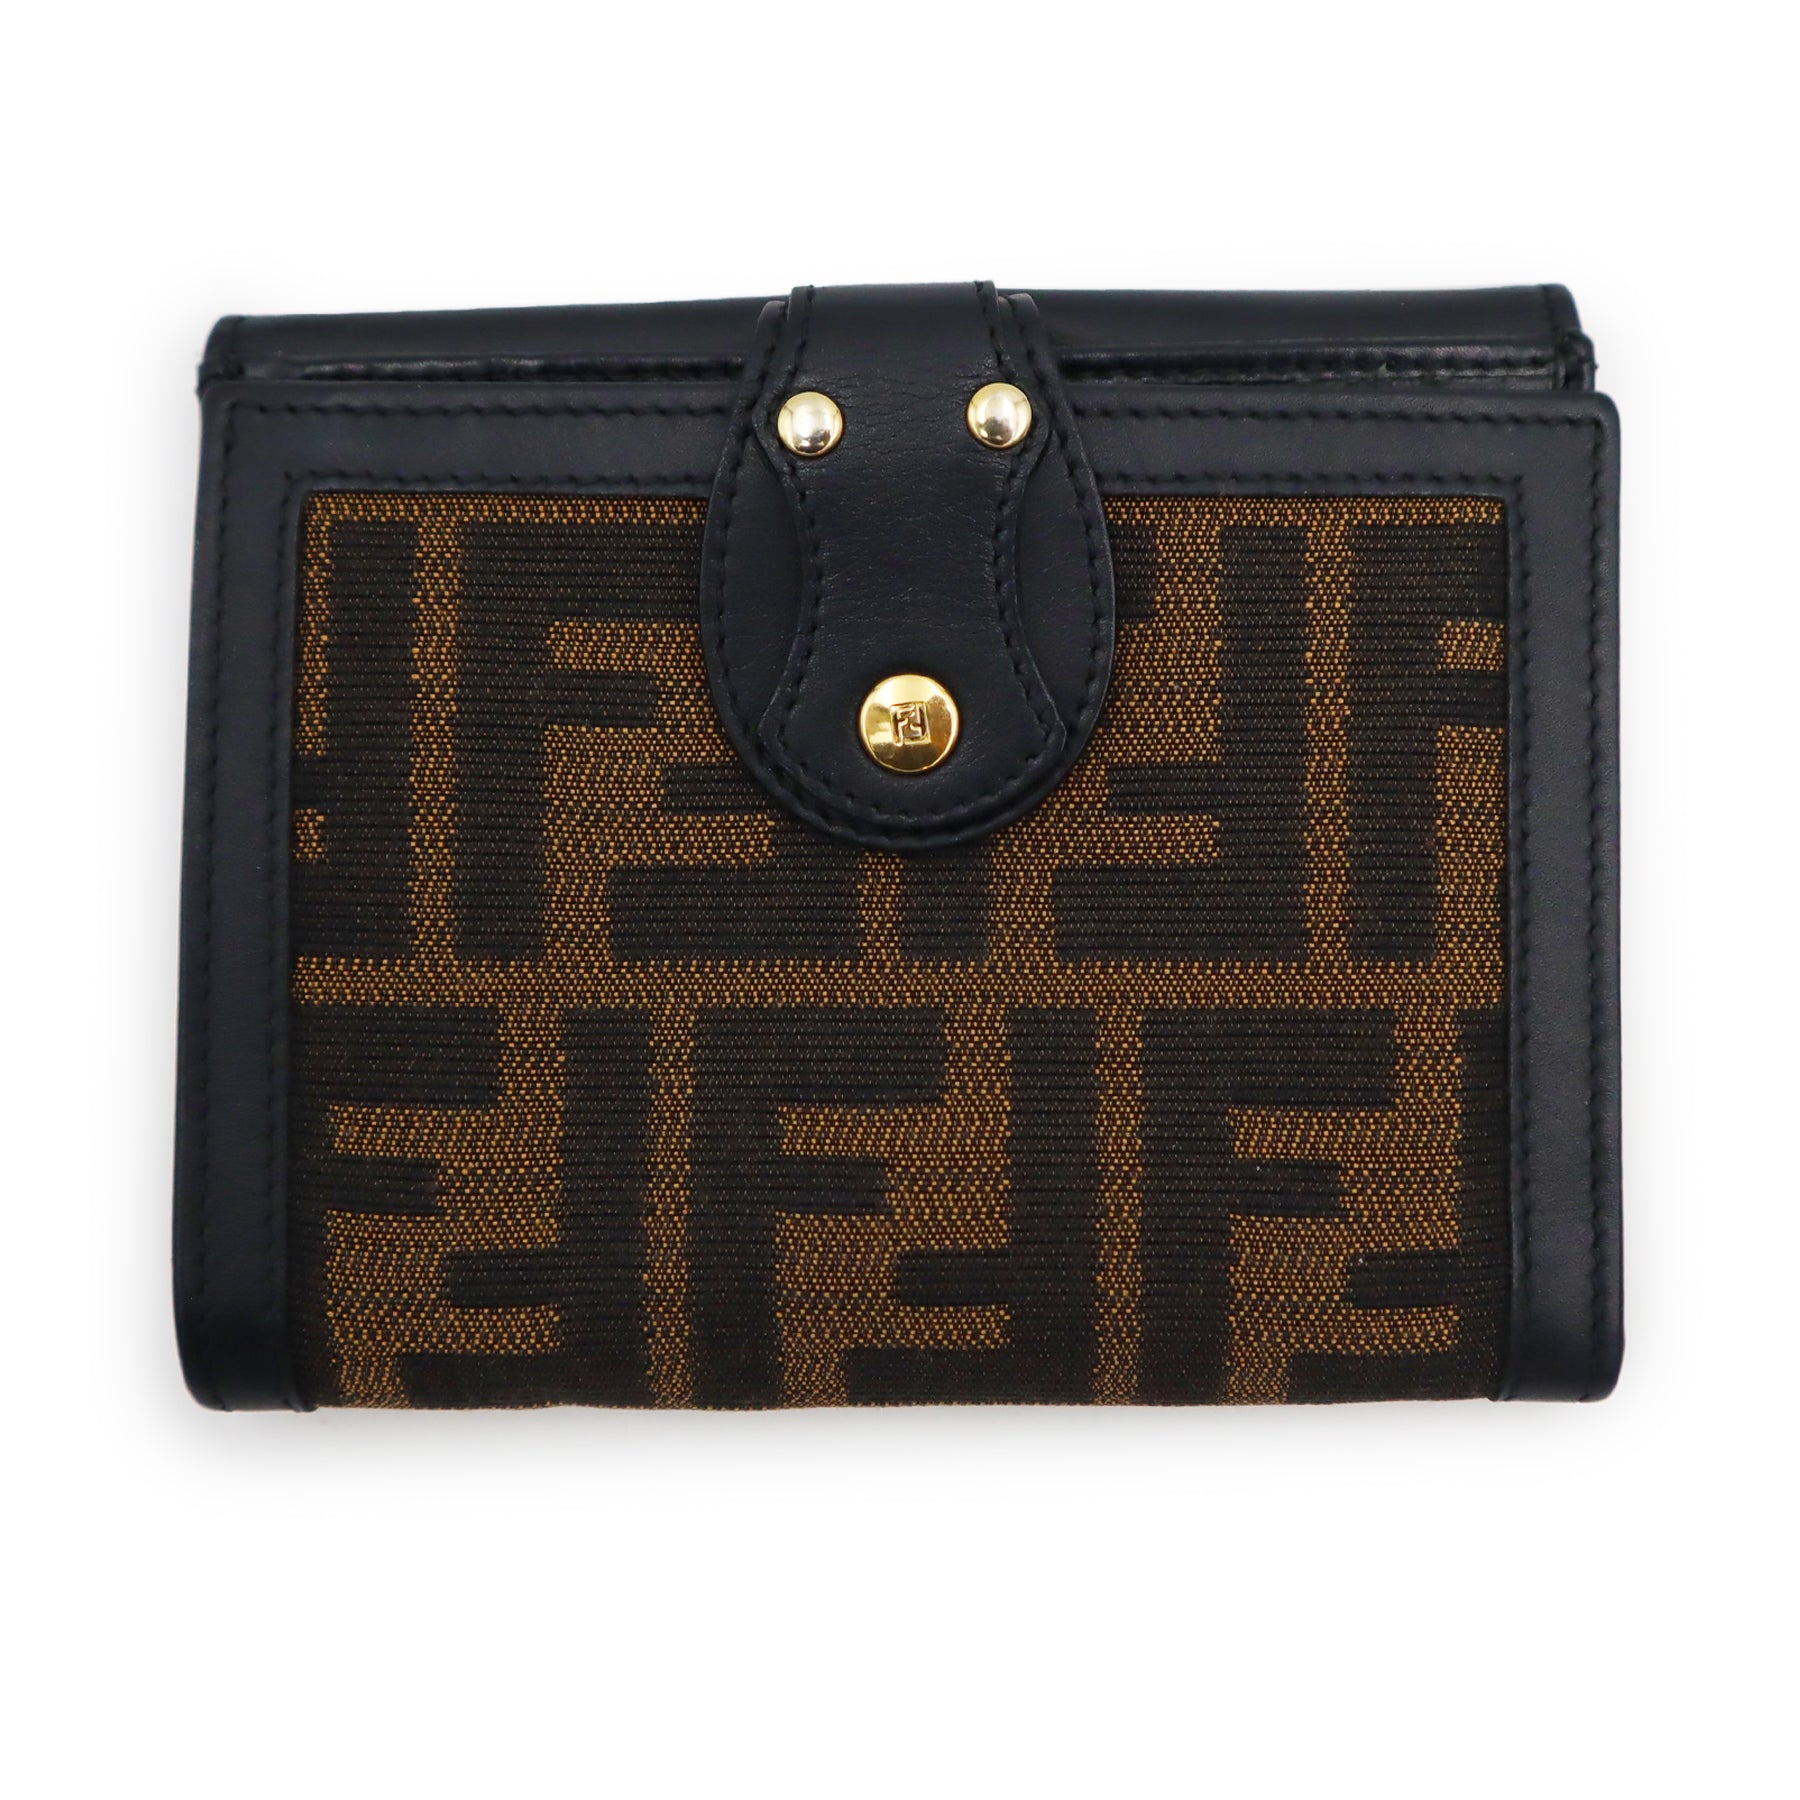 DEAL OF THE DAY Pre-Owned Fendi Zucca Canvas Compact Wallet